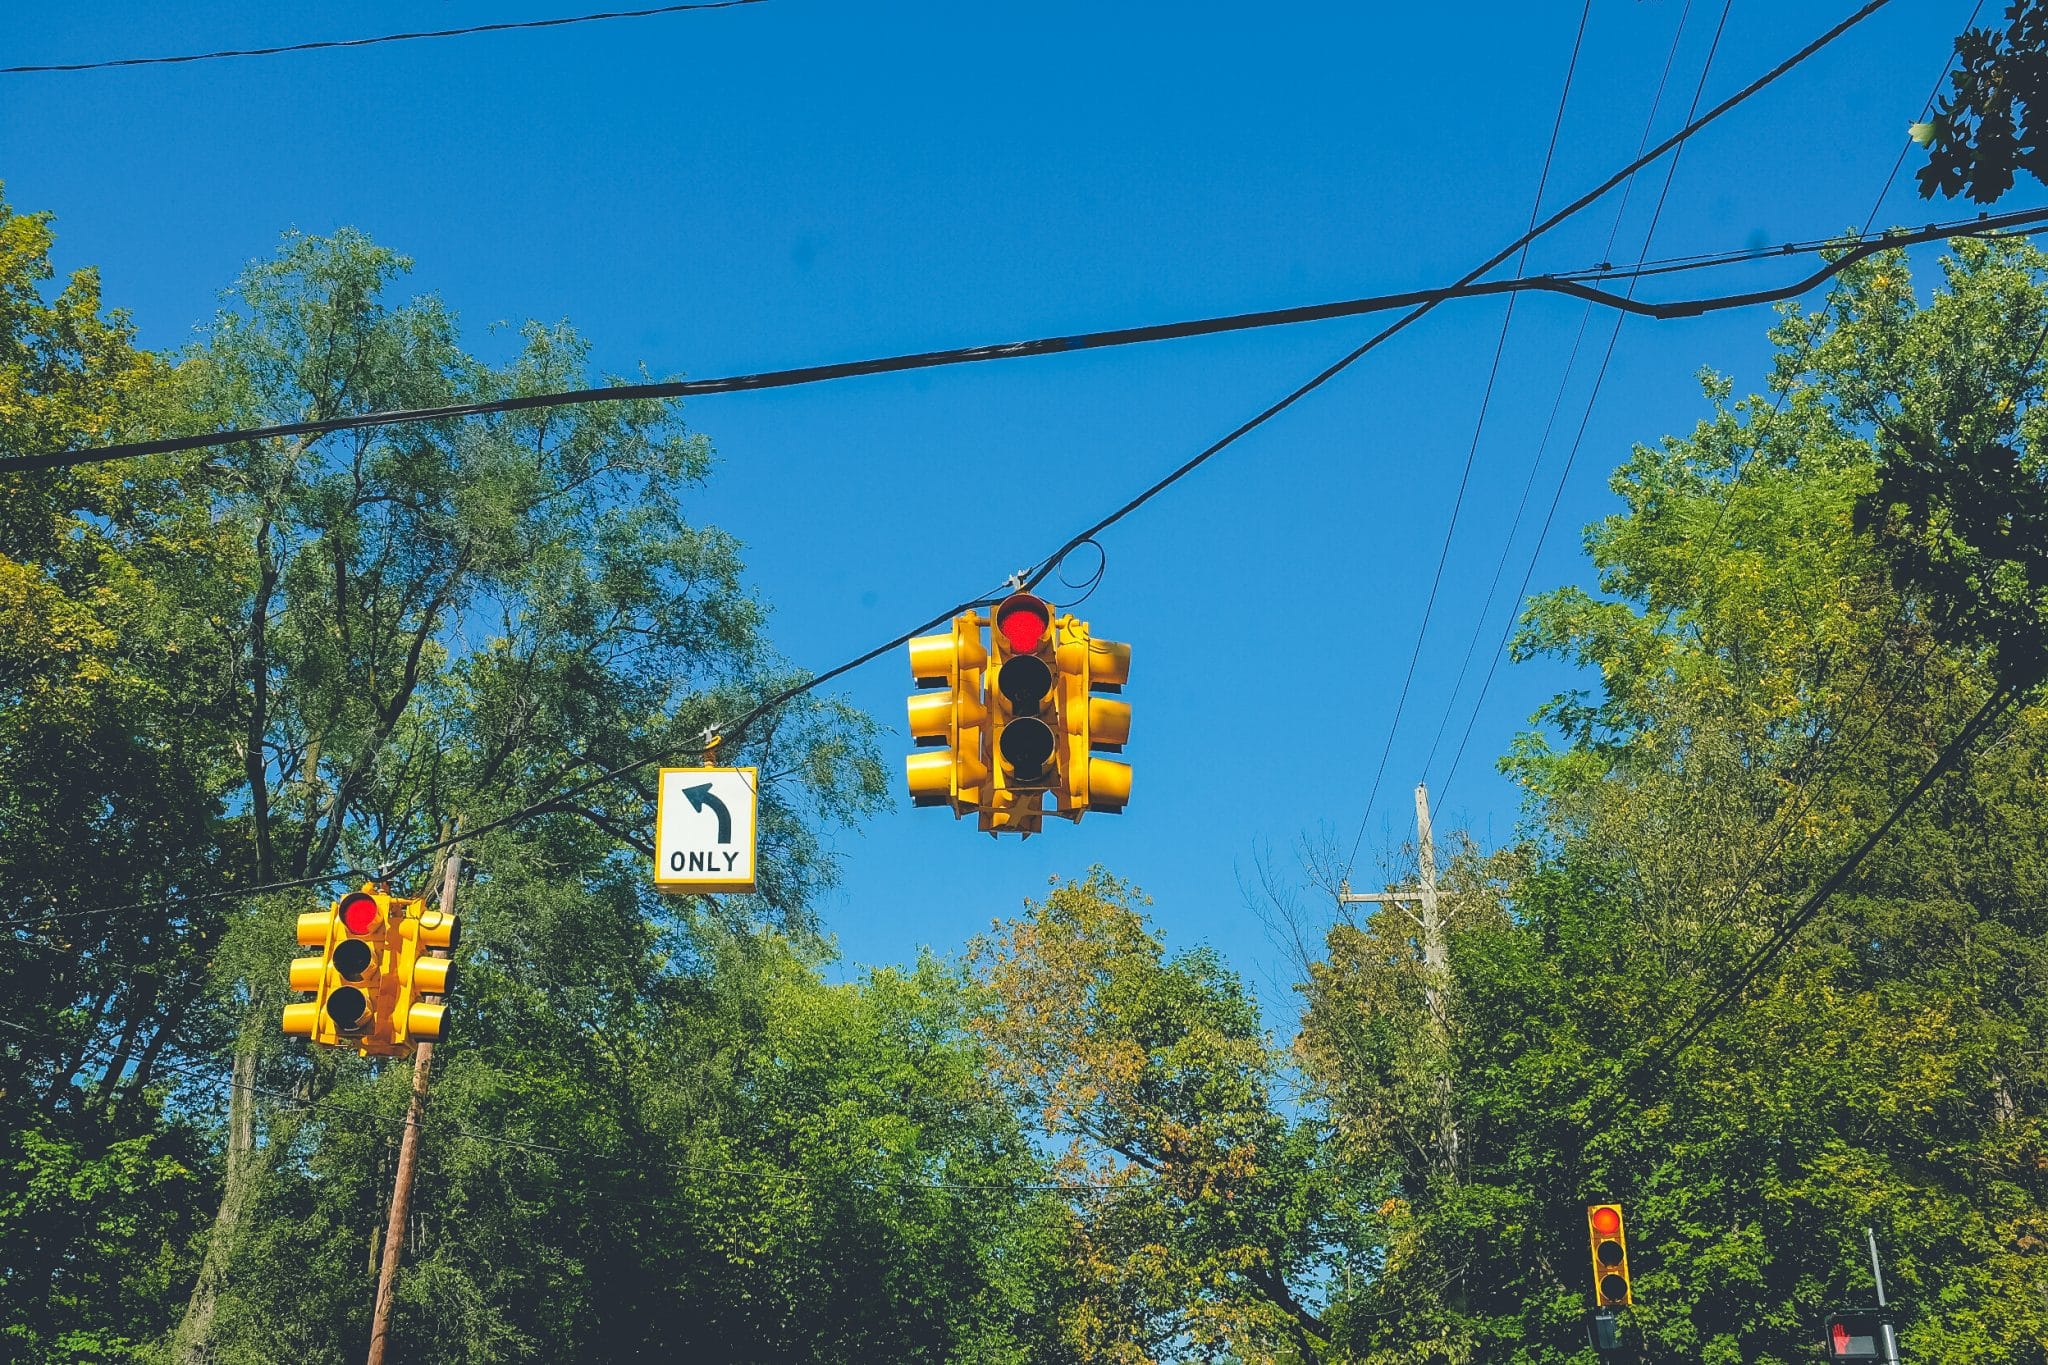 Dunwoody traffic signals are getting an upgrade that will help emergency vehicles